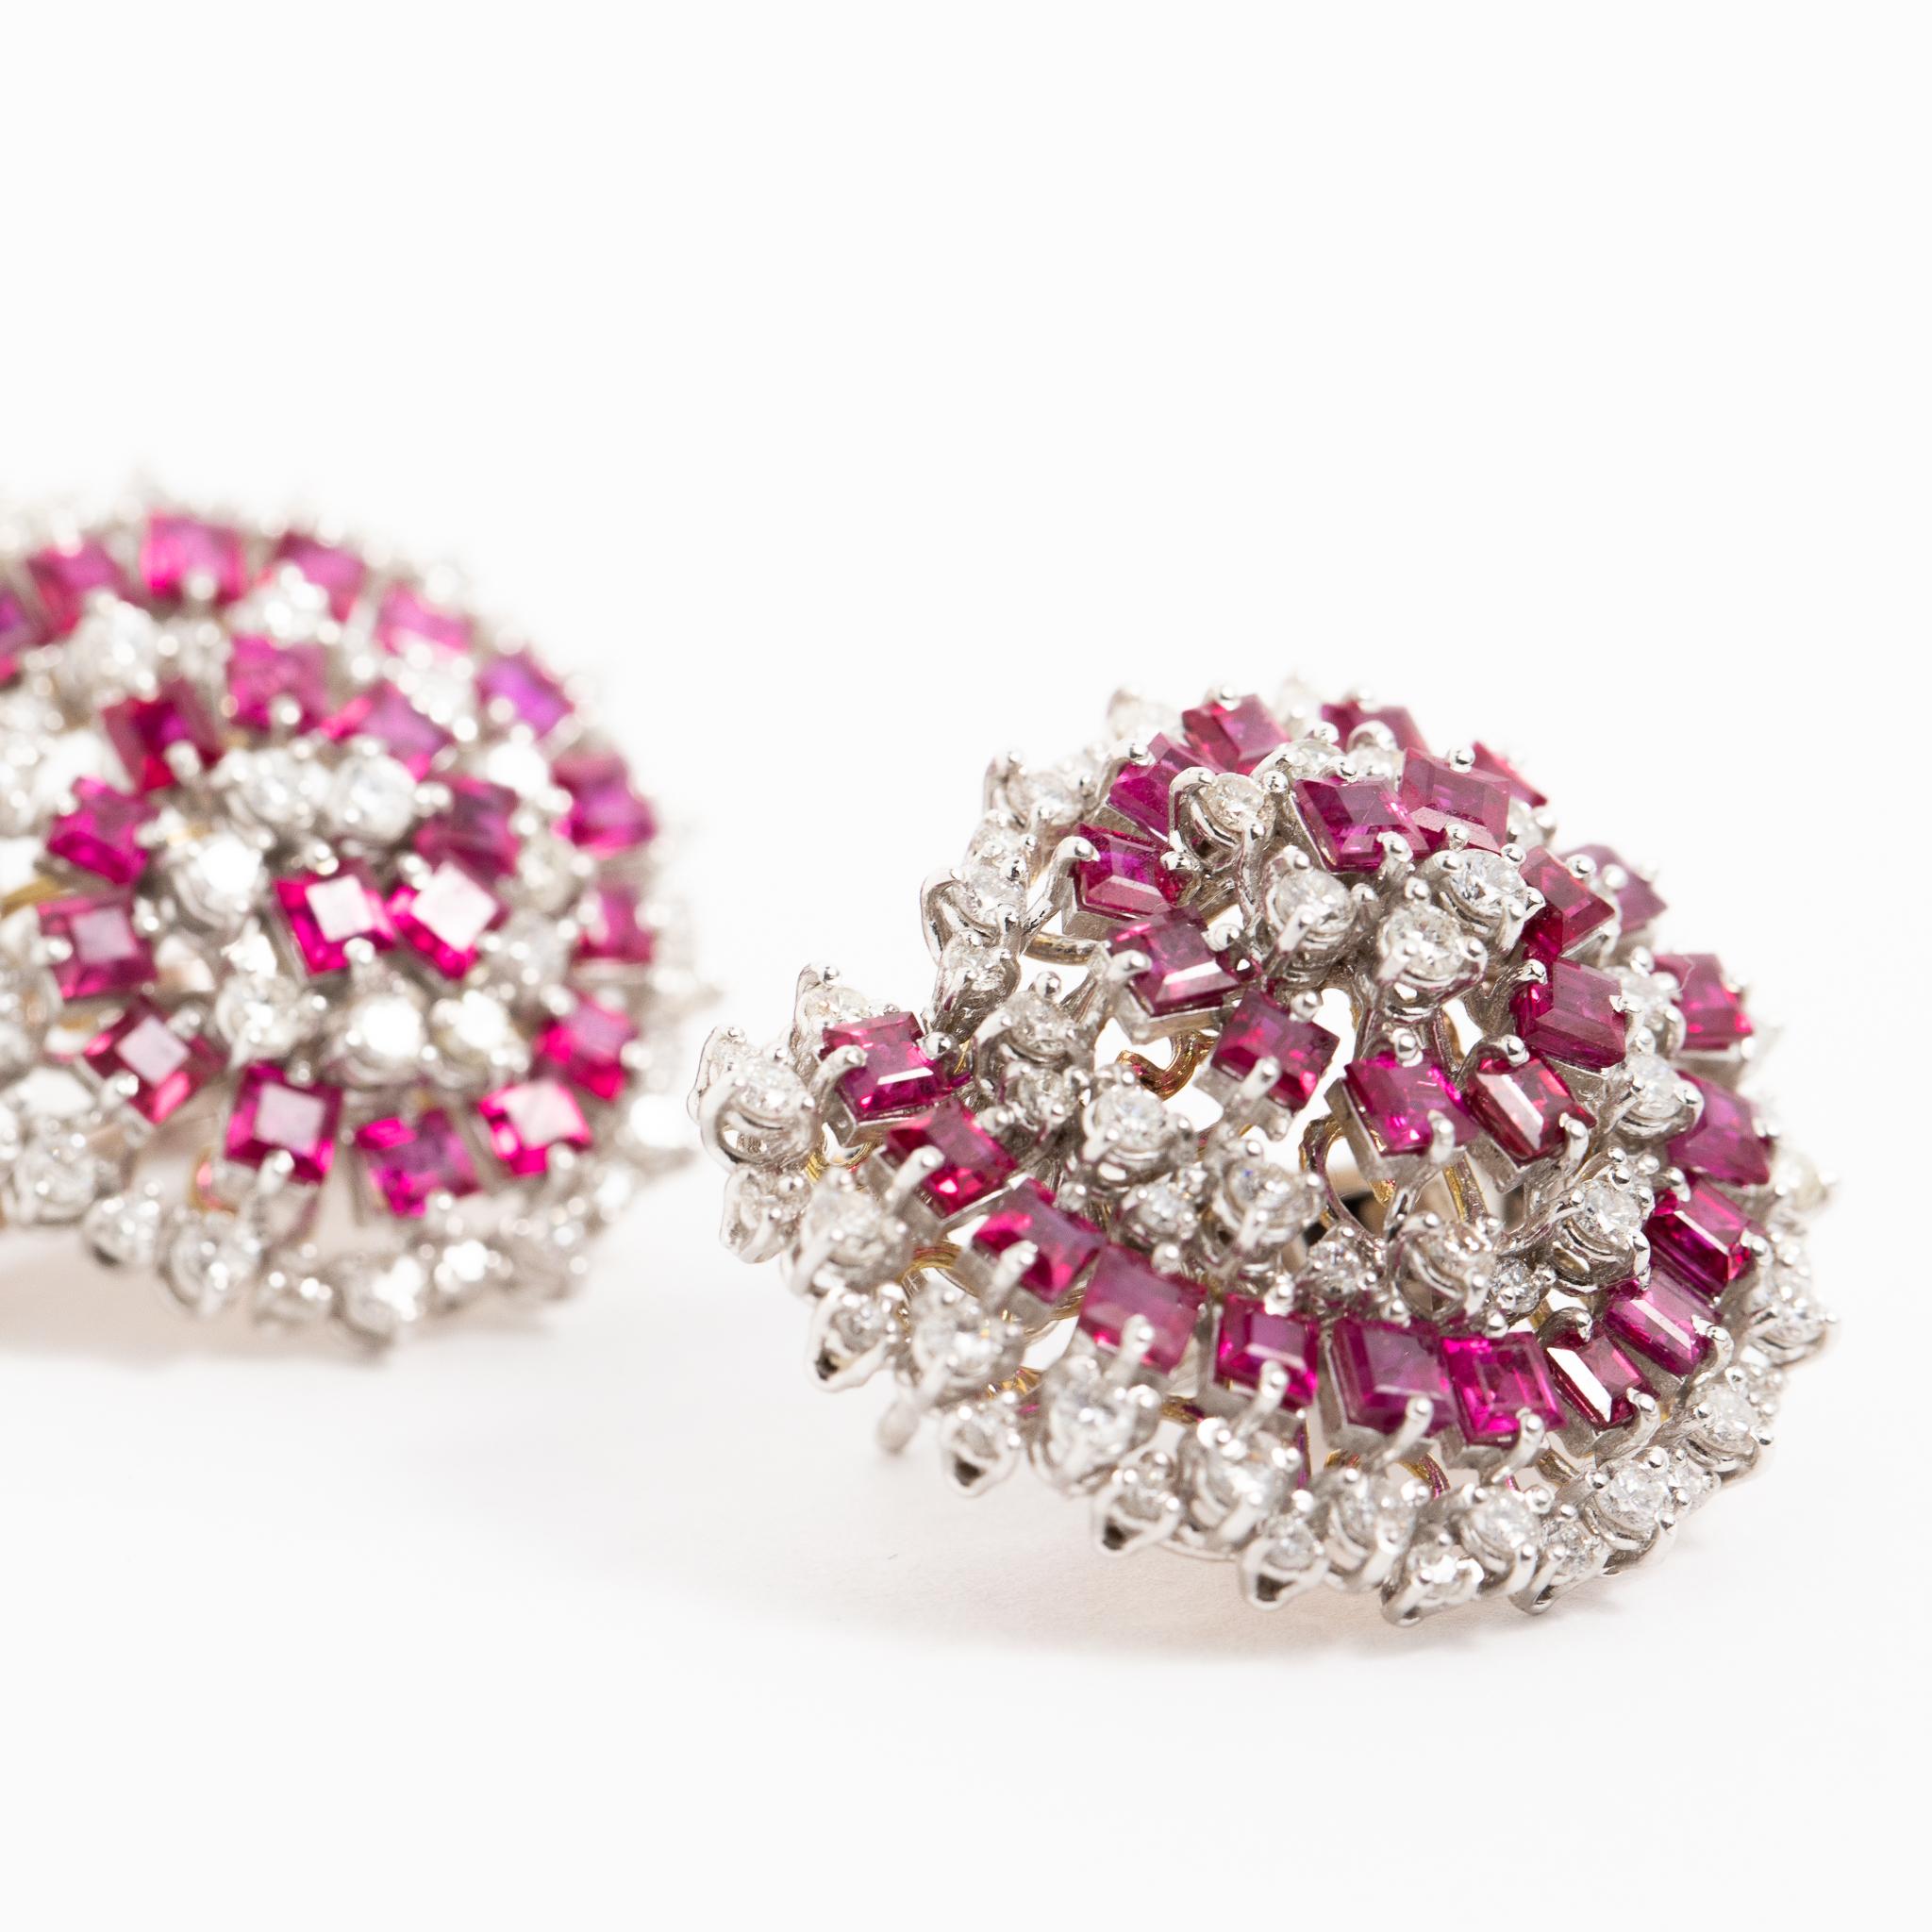 Handmade in Italy 18 kt. white gold earrings with brilliant-cut diamonds and carat-cut rubies.
This piece belongs to Fraleoni's Dolcevita collection.
The earrings have a spiral design where the colors of the stones blend perfectly.

Brilliant-cut